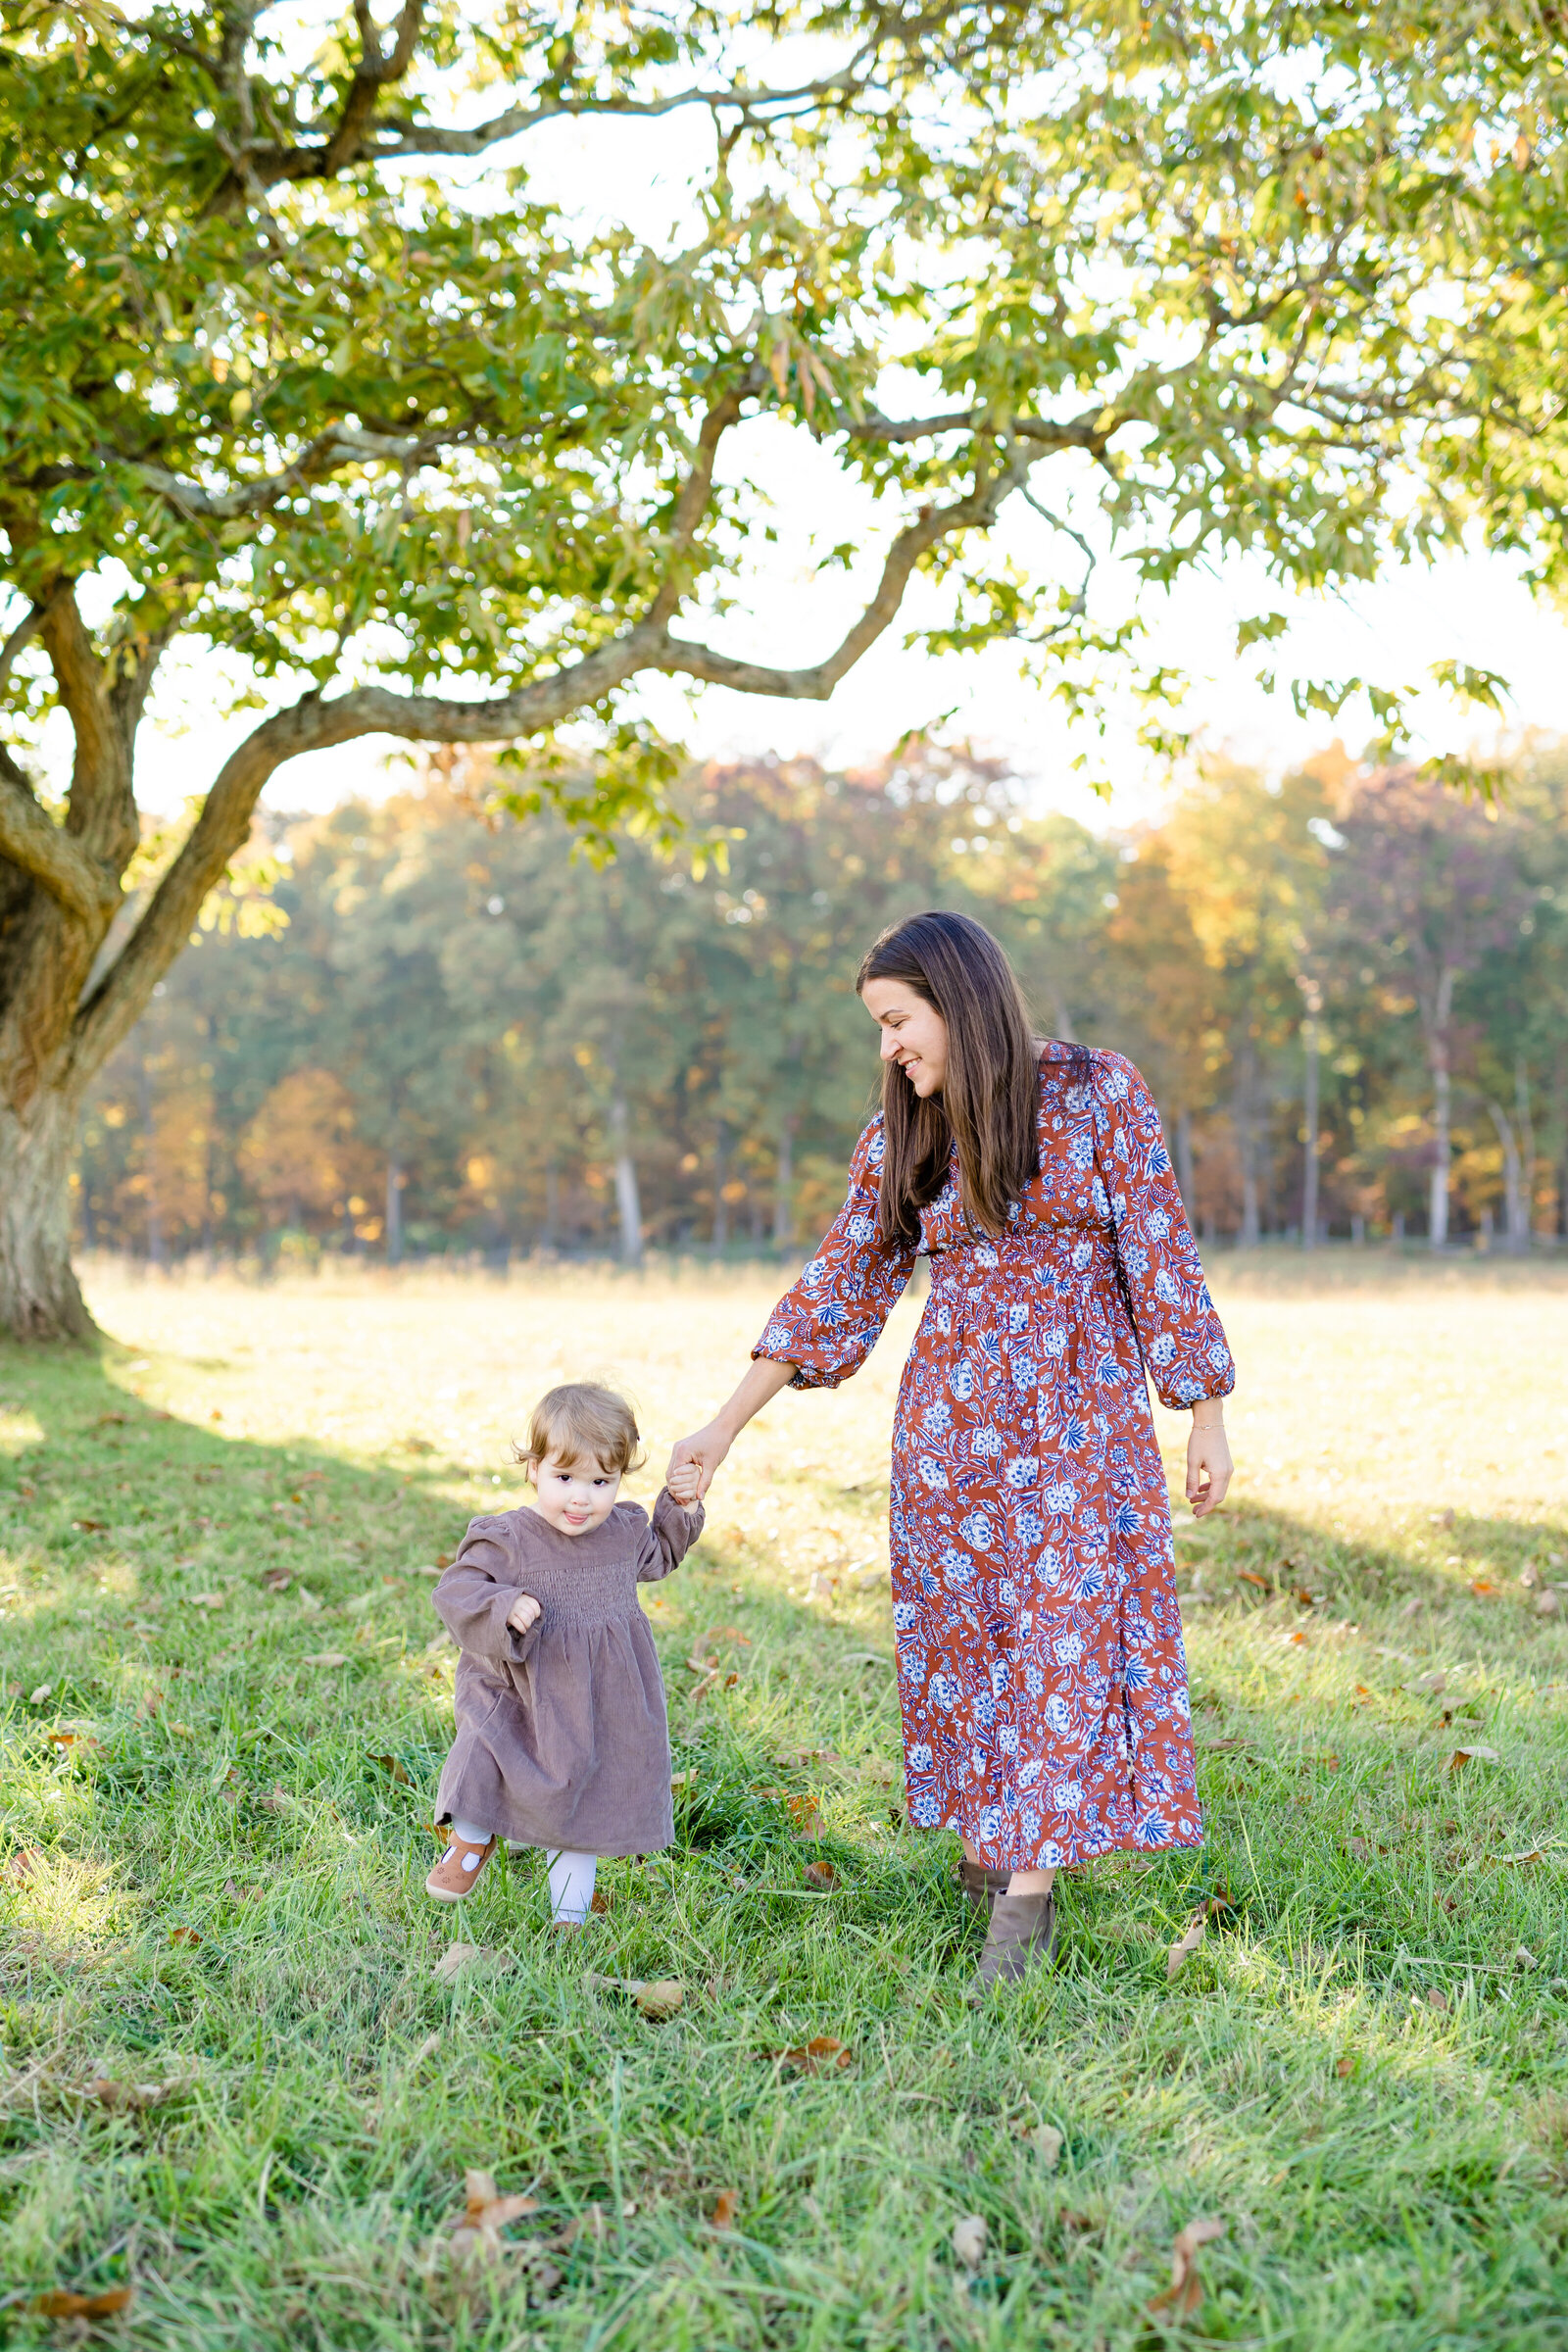 Light and Airy Fall Family Session at the Manassas Battlefield -Megan Hollada Photography - Northern Virginia Family Photographer